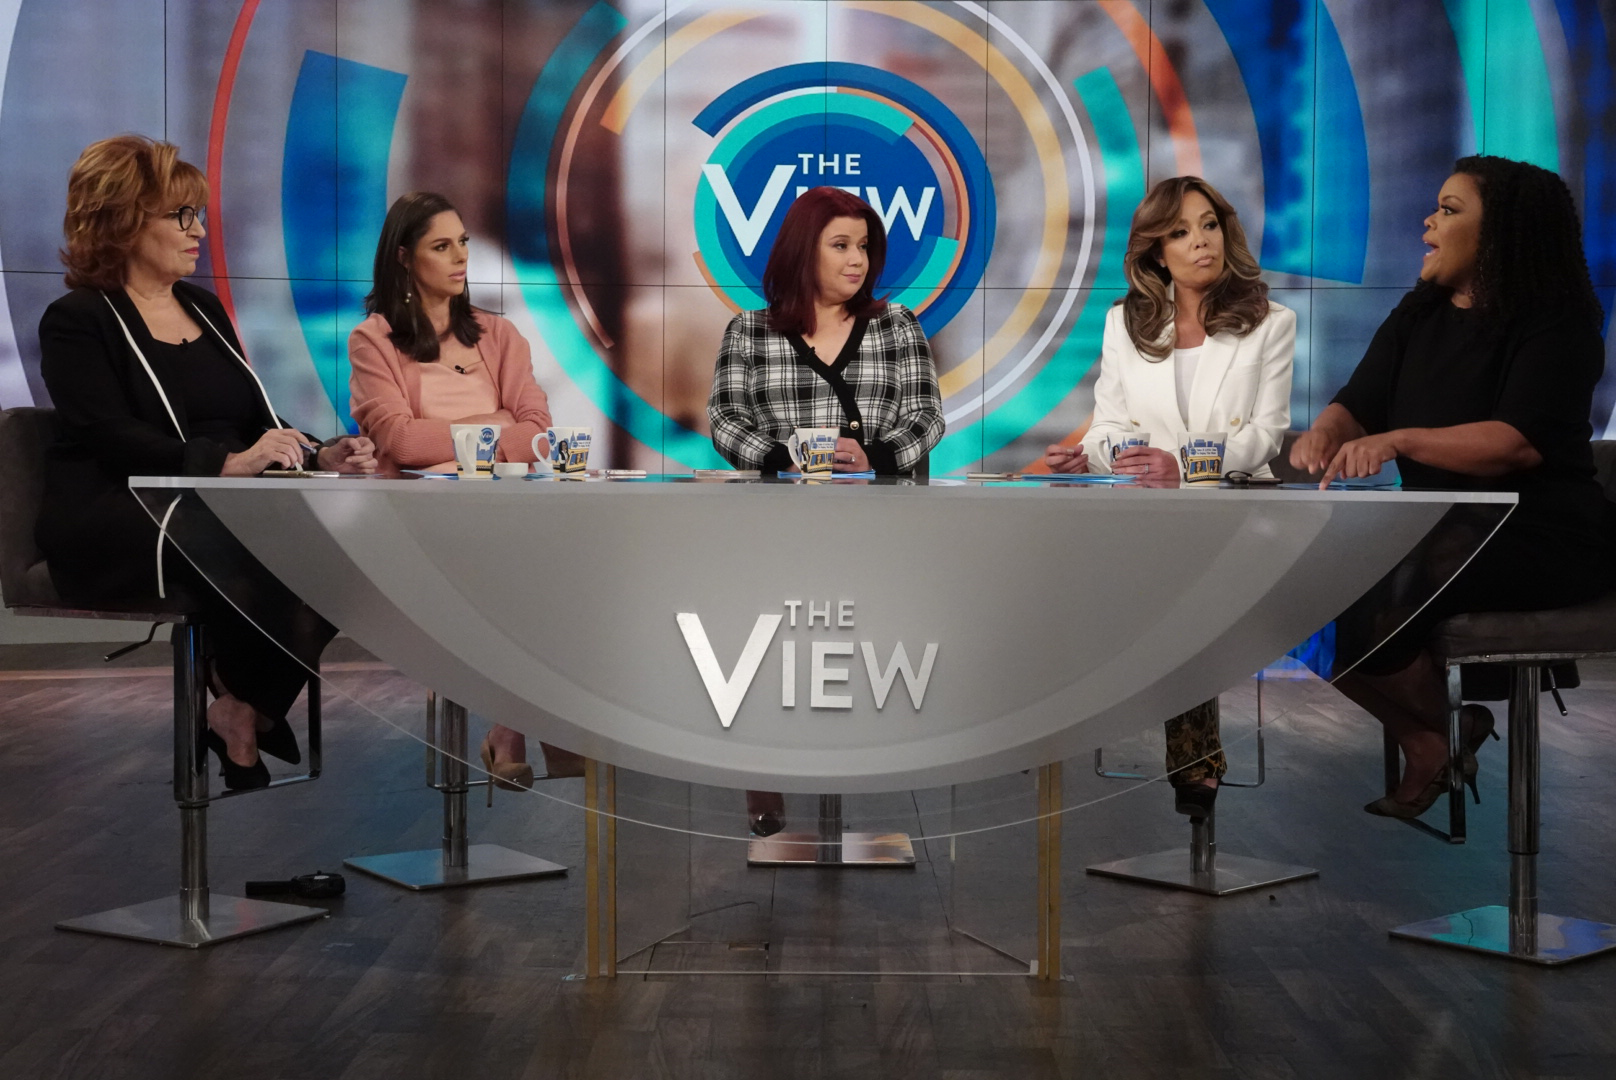 PHOTO: "The View" co-hosts Joy Behar, Abby Huntsman, Sunny Hostin, and guest co-hosts Anna Navaro and Yvette Nicole Brown discuss the day's hot topics, Jan. 10, 2020.